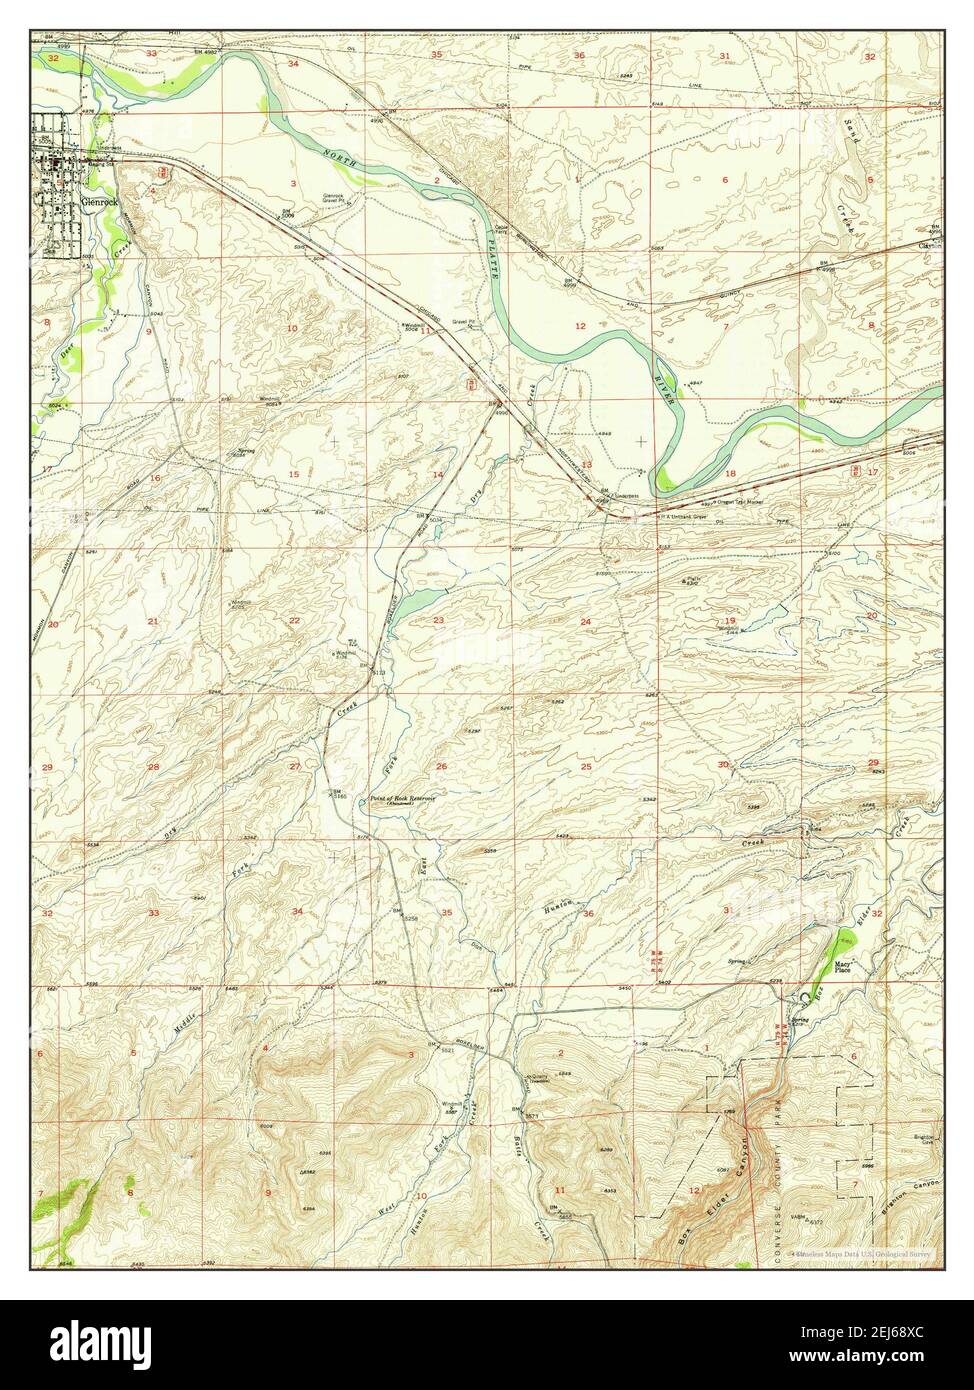 Glenrock, Wyoming, map 1950, 1:24000, United States of America by Timeless Maps, data U.S. Geological Survey Stock Photo